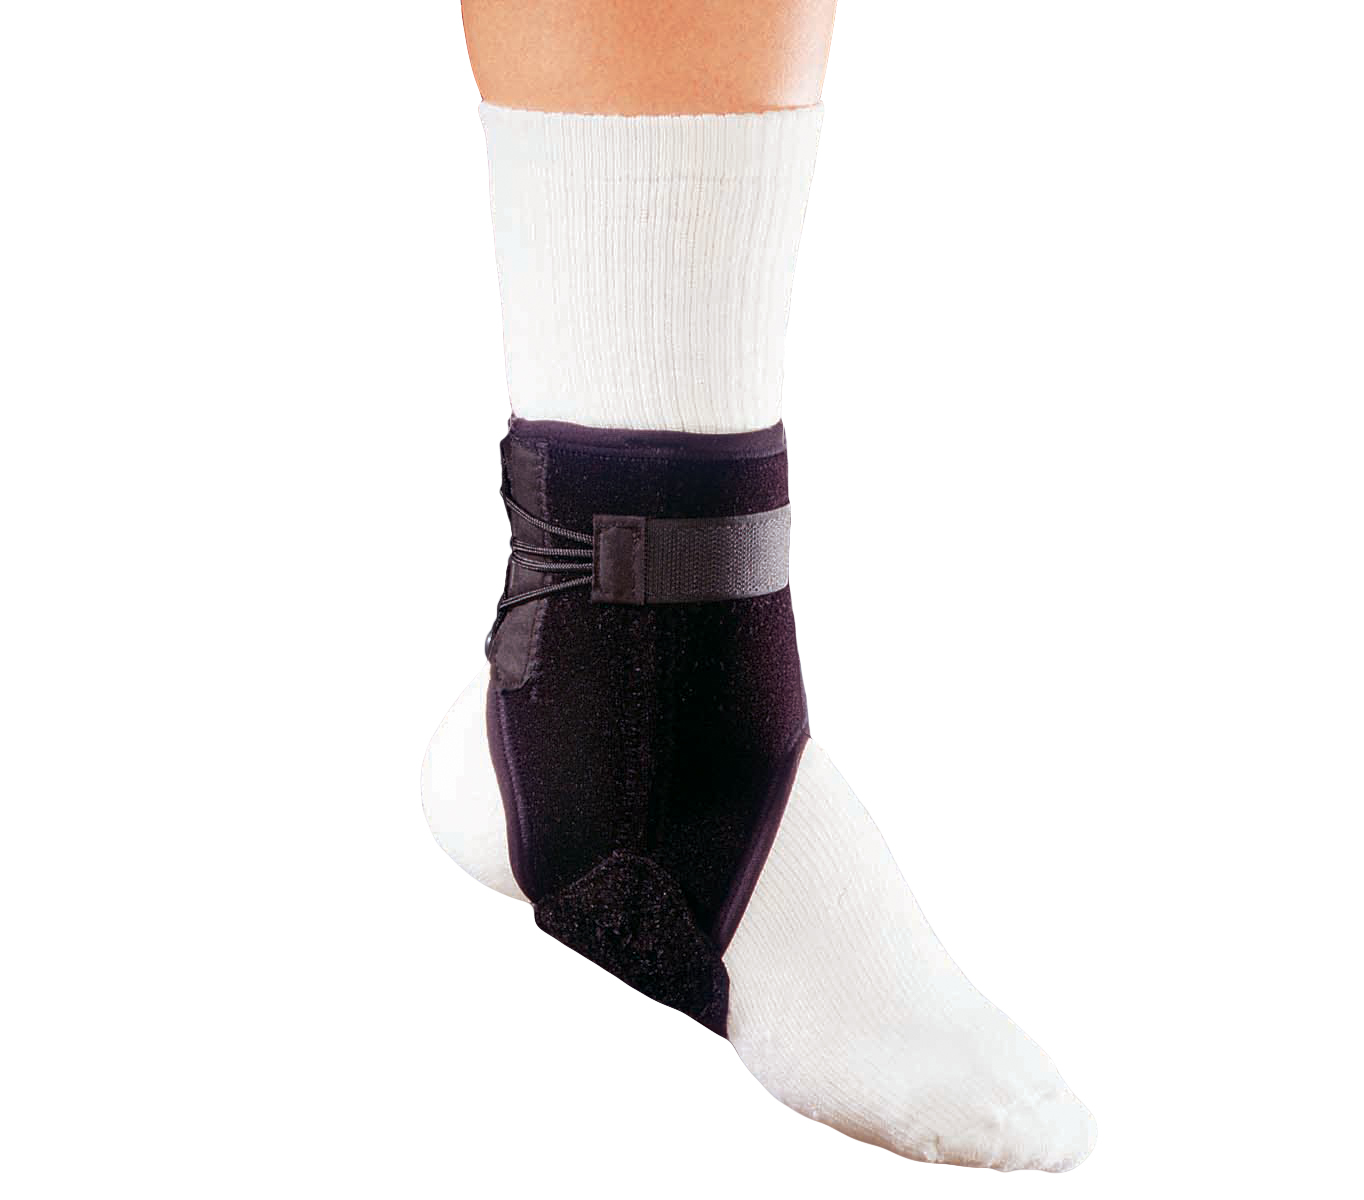 C-214 Ankle Stabilizer With Medial-Lateral Stays